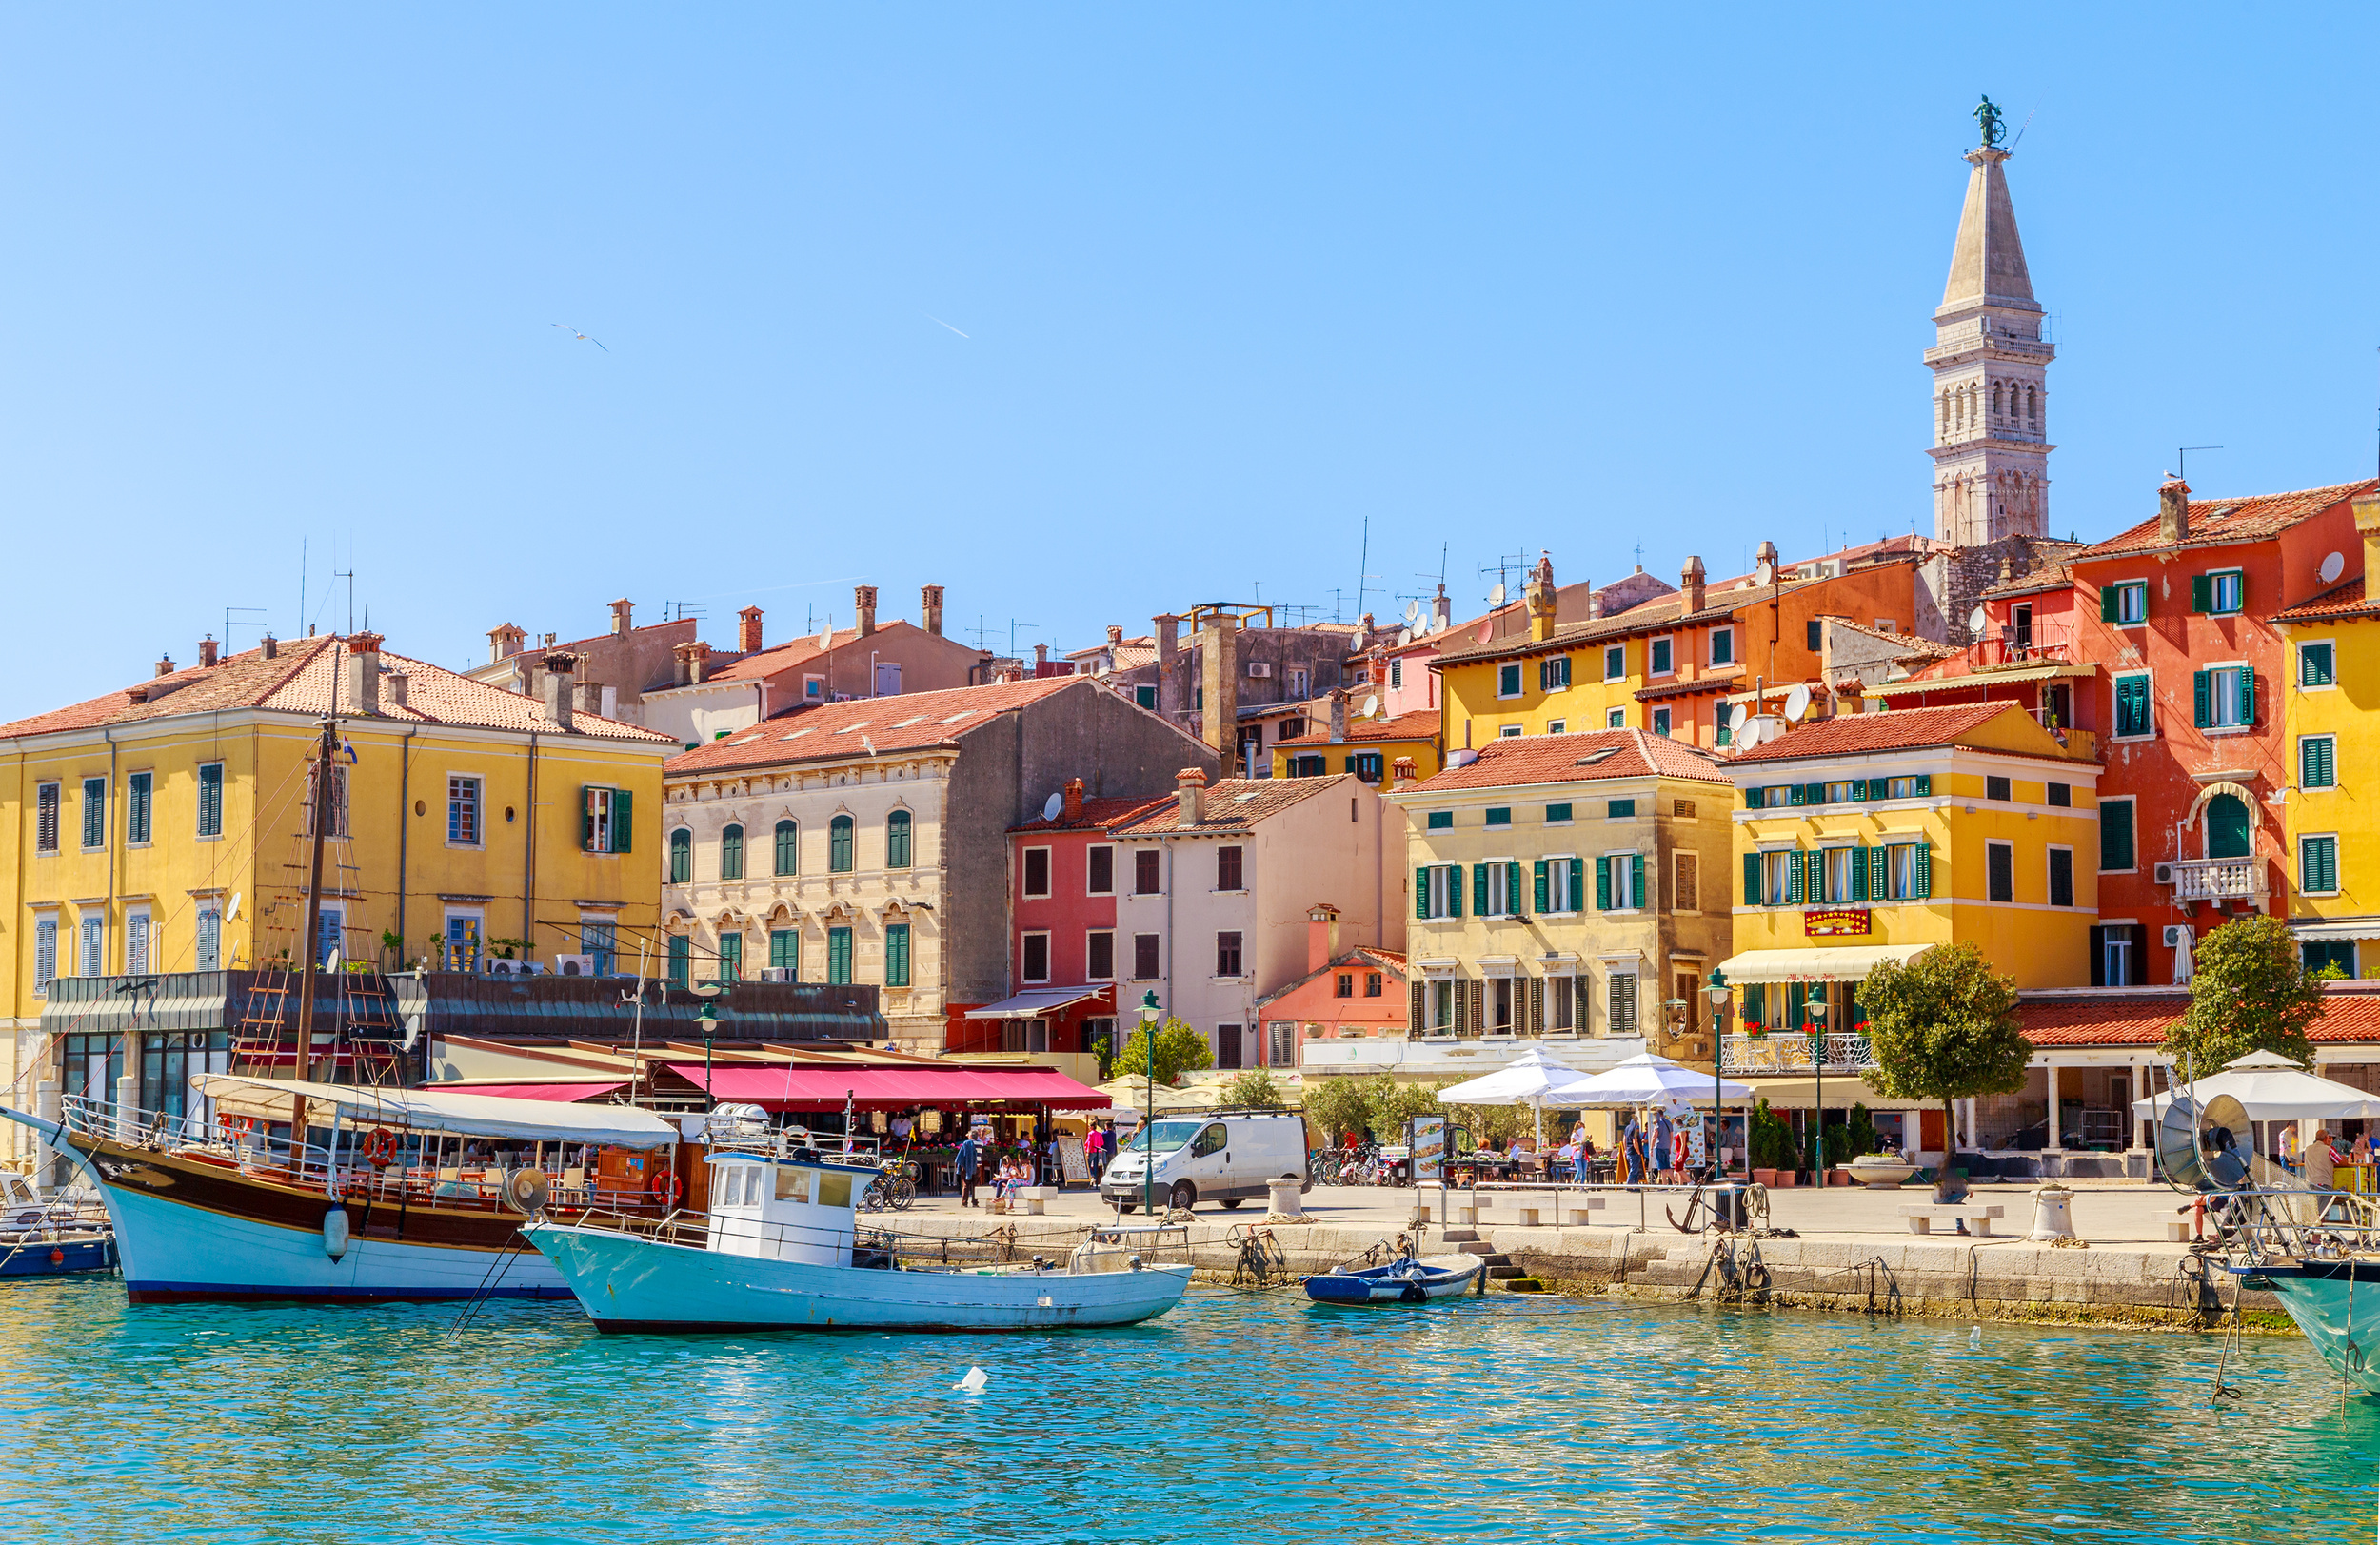 <p>This seaside village is reminiscent of Italy — the colorful architecture, the gelato, pizza, and cafes, all along the stunning Mediterranean waterfront. The winding alleys through the Old Town will only have you lost for a moment before you pop out for an adorable cafe or a viewpoint of the surrounding area.</p><p><a href='https://www.msn.com/en-us/community/channel/vid-cj9pqbr0vn9in2b6ddcd8sfgpfq6x6utp44fssrv6mc2gtybw0us'>Did you enjoy this slideshow? Follow us on MSN to see more of our exclusive lifestyle content.</a></p>